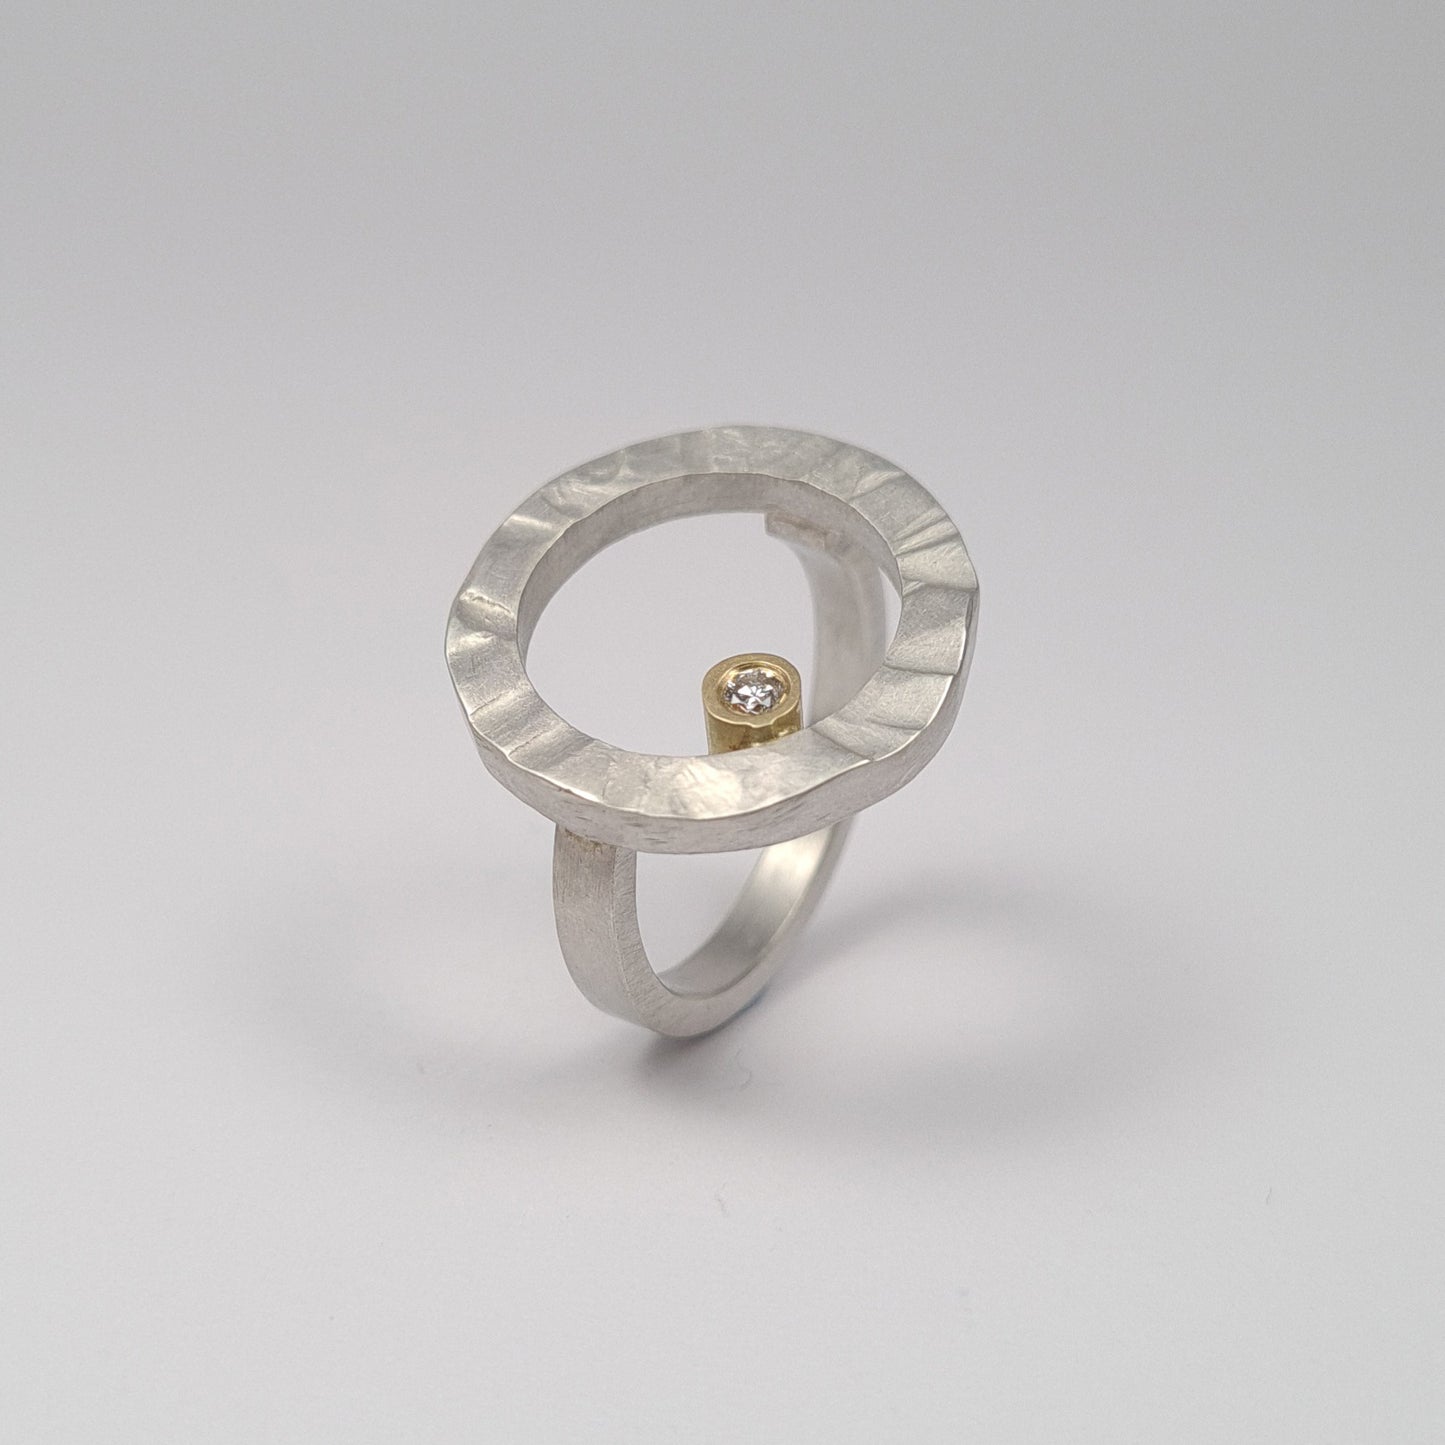 Ring from the forJa collection. Circles